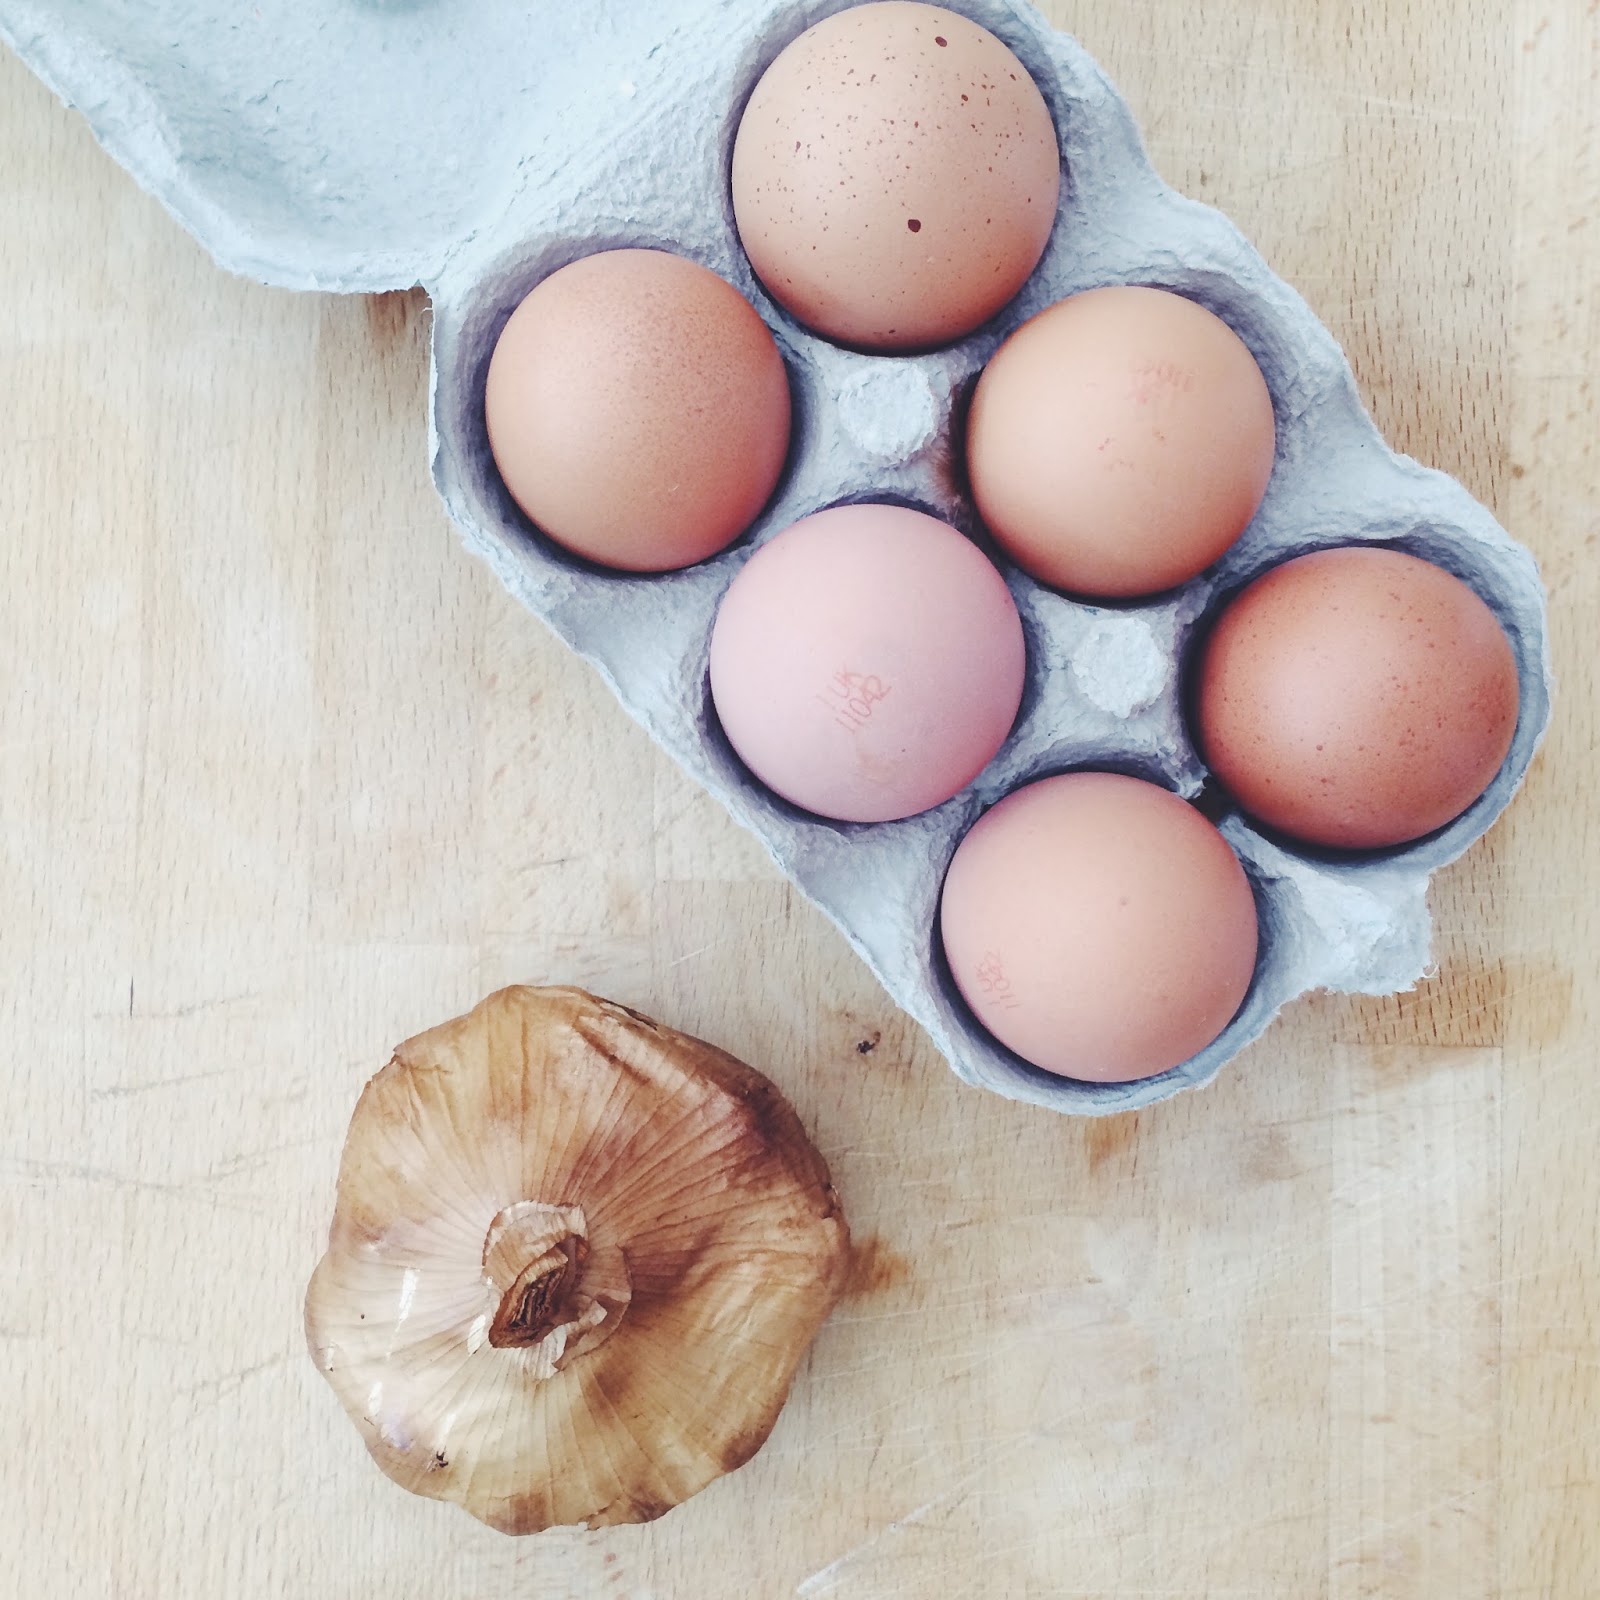 Dalry Rose blog, organic eggs, smoked garlic, what makes a house a home